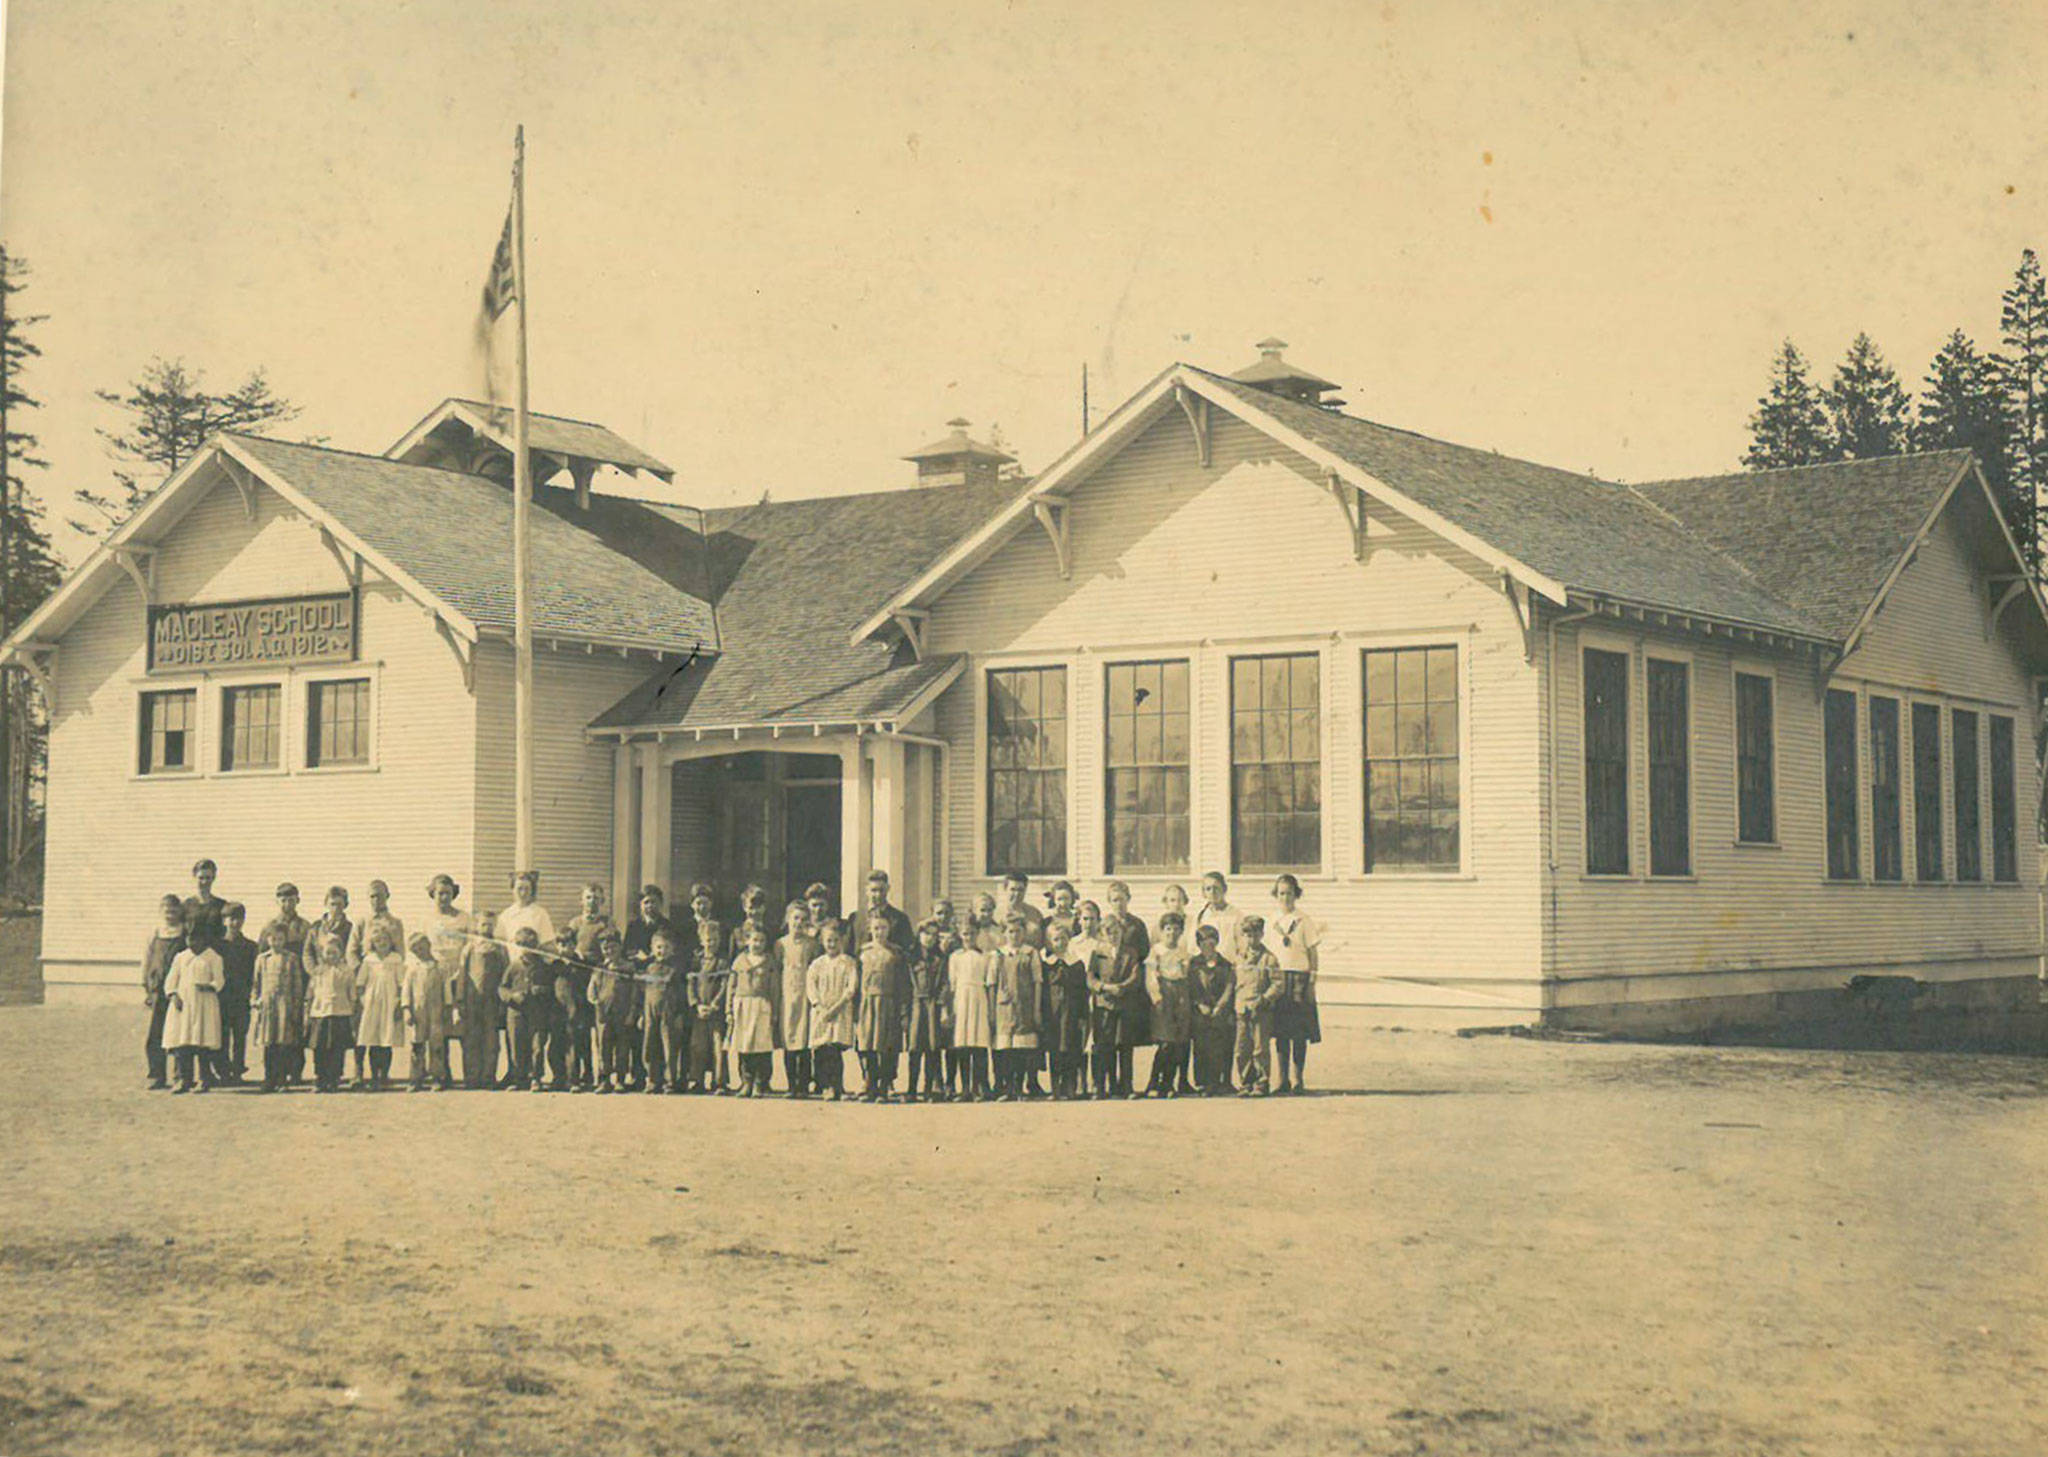 Macleay School, seen here somewhere between 1915-1920, was leased out to the Sequim Prairie Grange members from 1942-1965 until they purchased it from the Sequim School District. Photo courtesy of Bonnie Hagberg